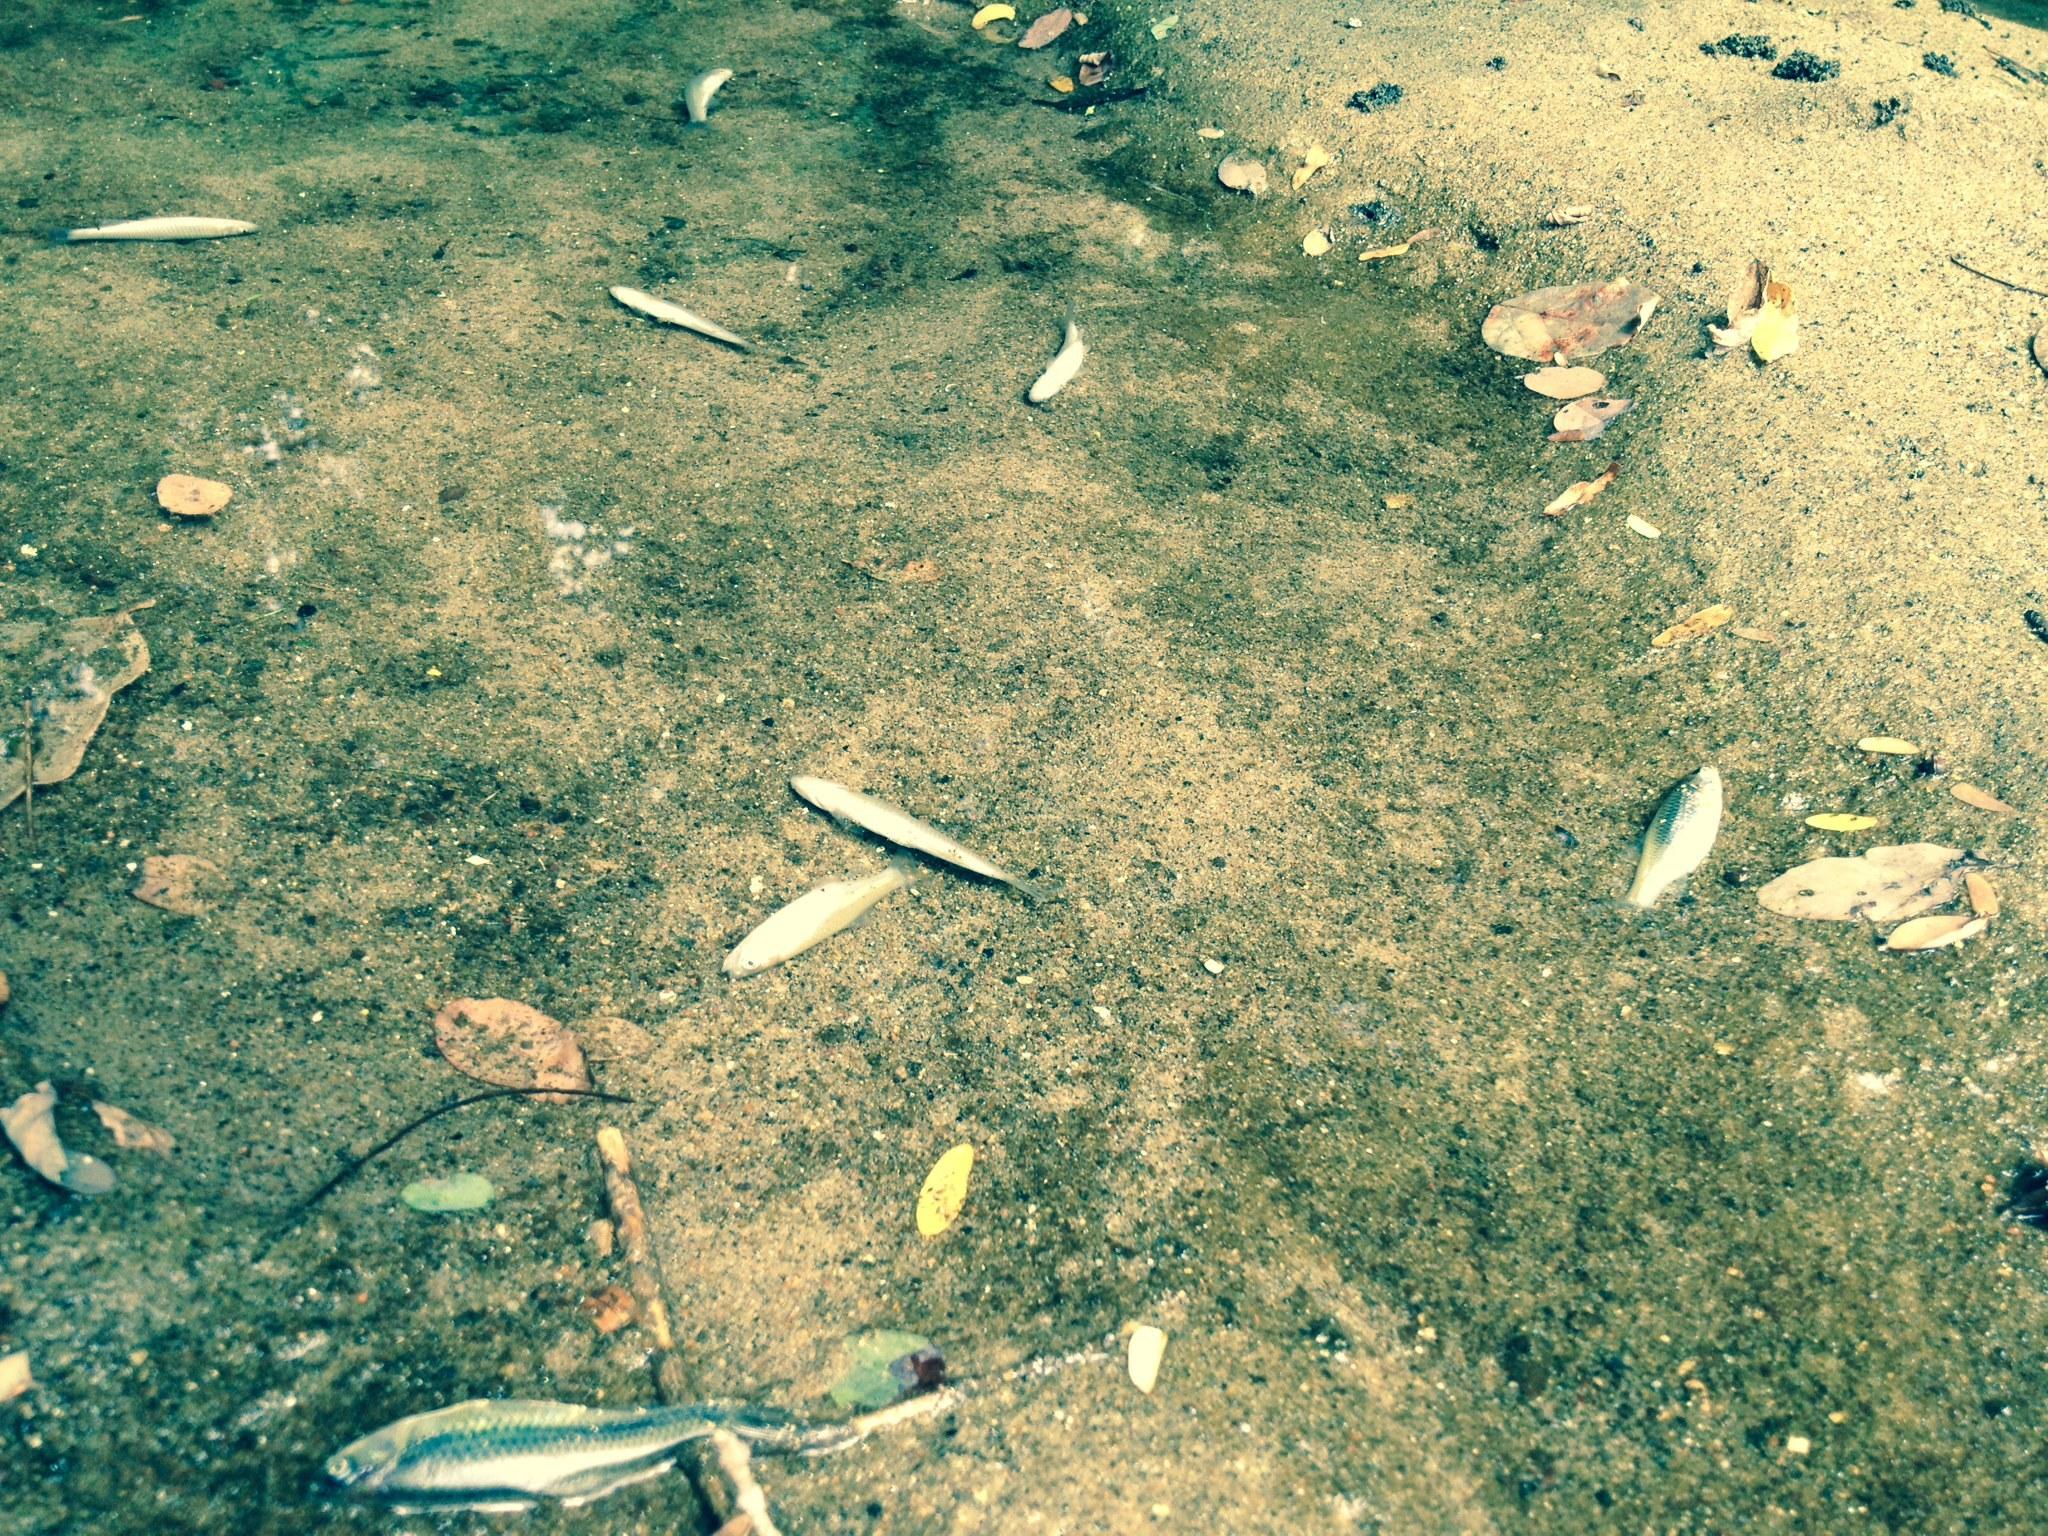 Hundreds of fish reportedly died in Herring Run and one of its tributaries Thursday. Here, a lone live fish swims amid the dead ones.